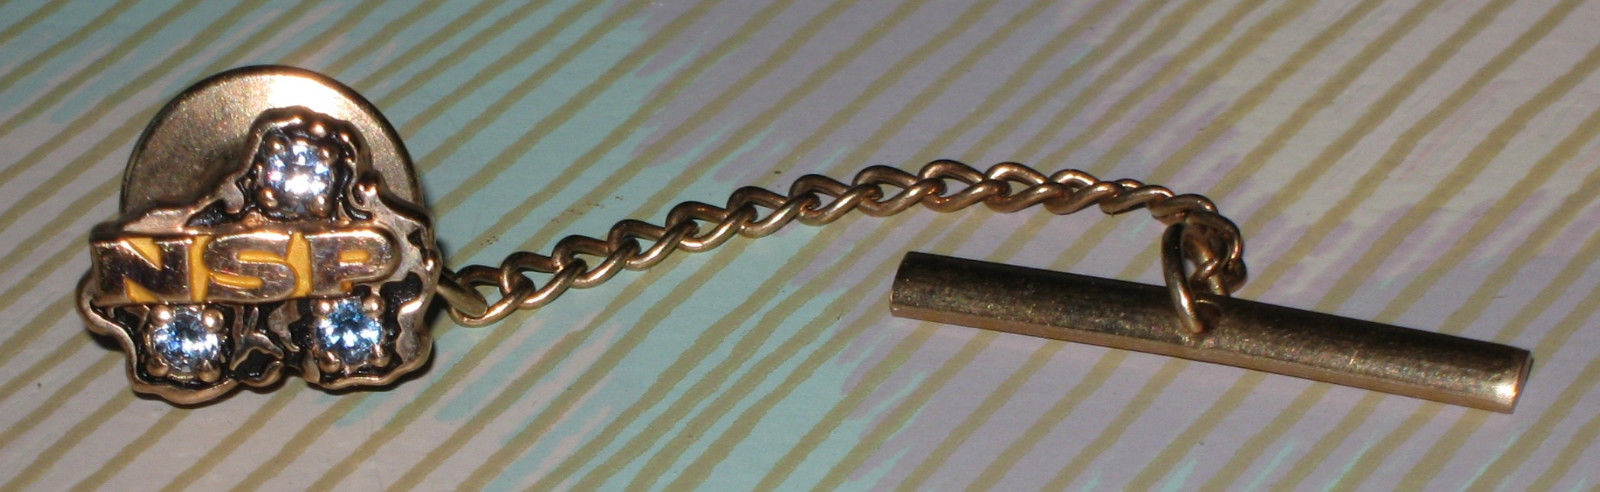 Vintage NSP 30 Years of Service Tie Clasp, Northern States Power